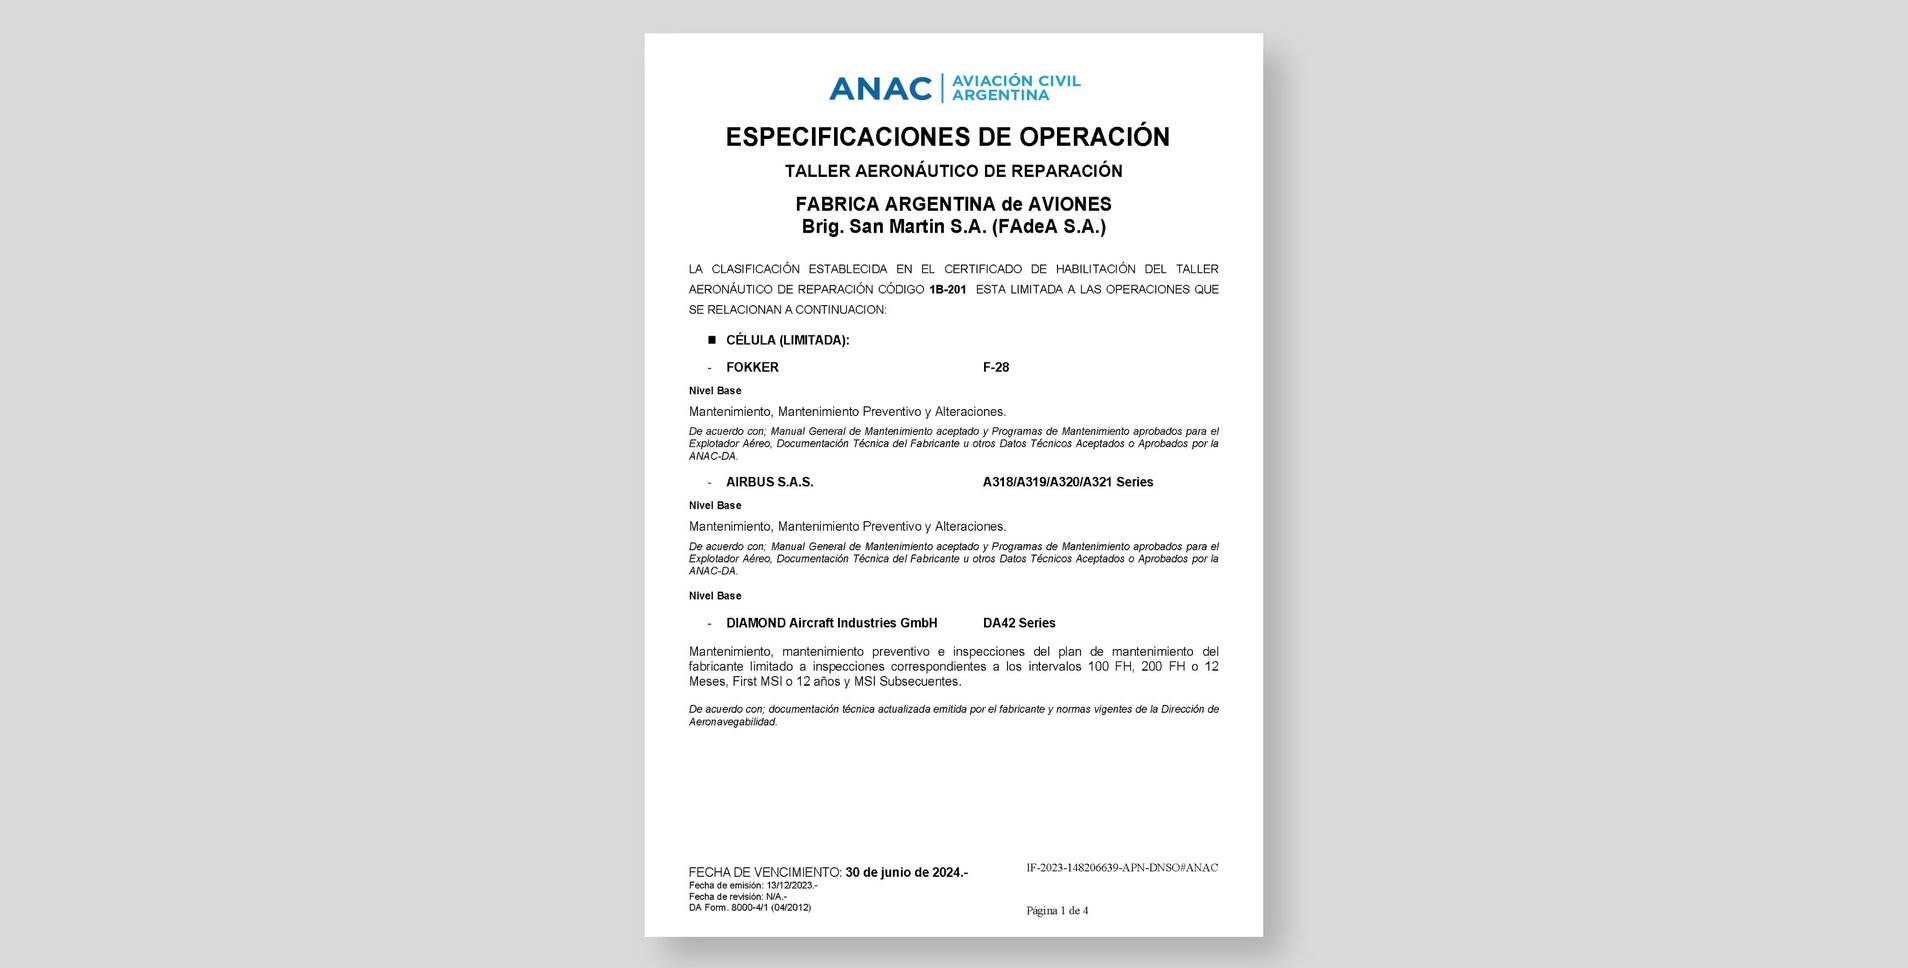 ANAC - Operations Requirements